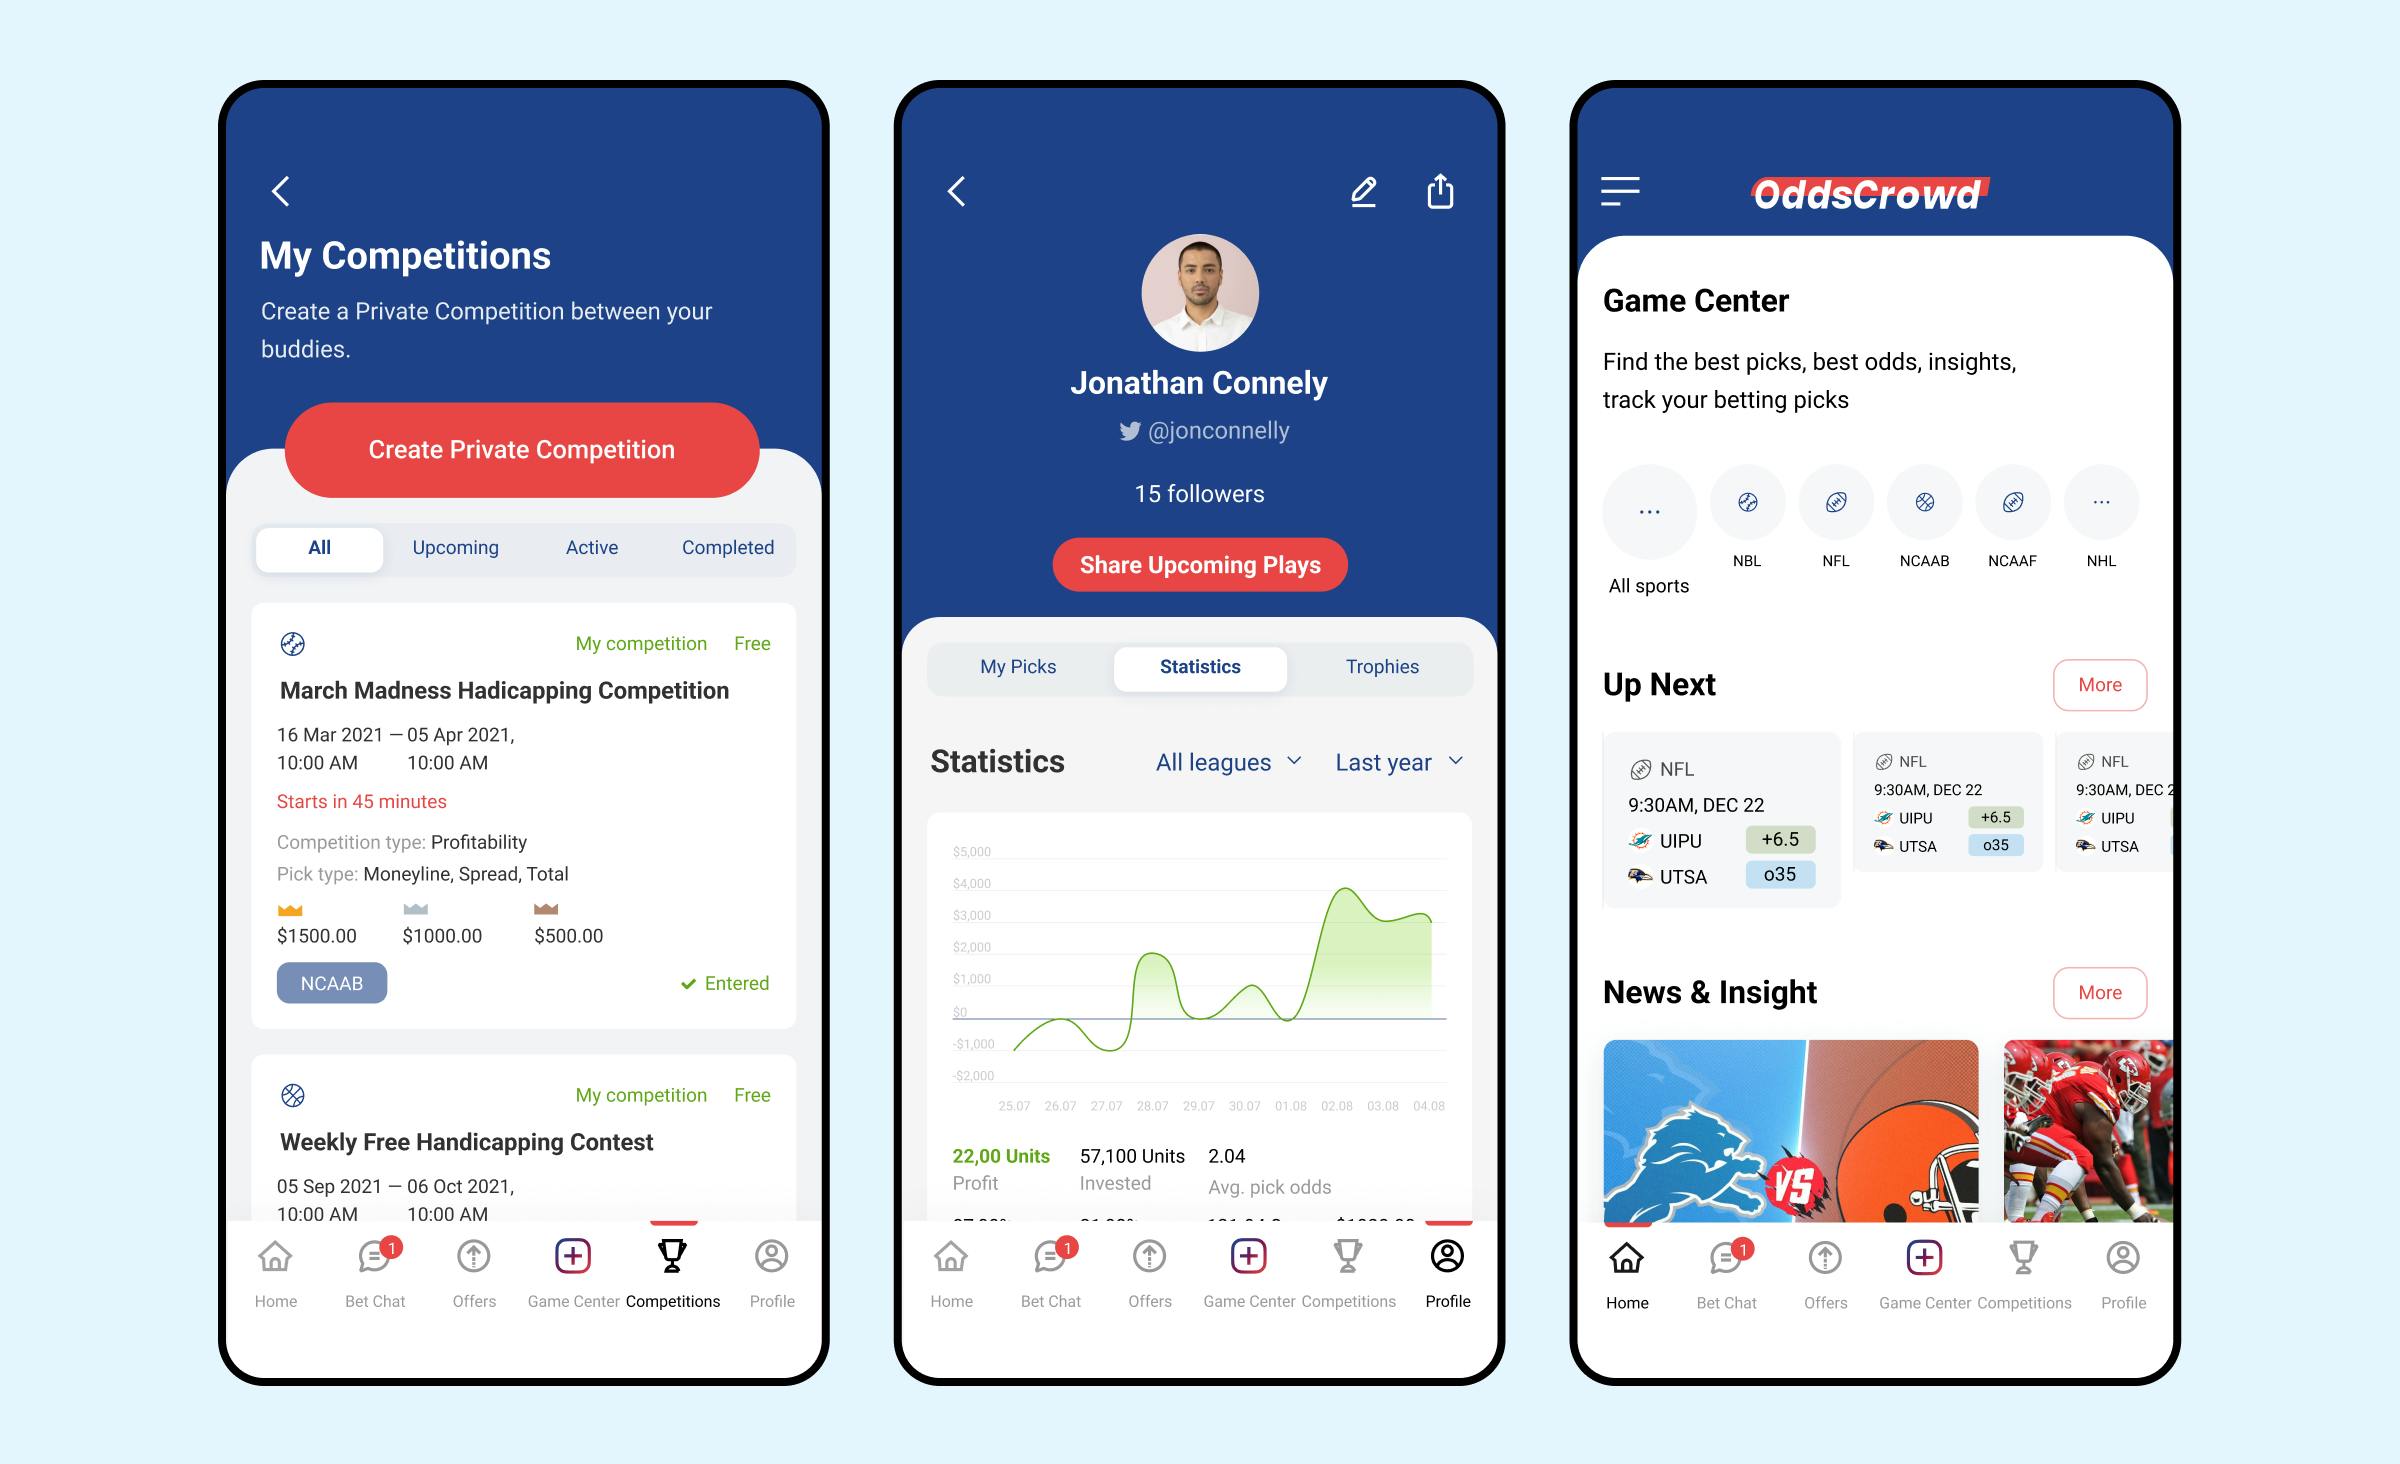 Screens of the OddsCrowd app, designed and developed by Ronas IT, as an illustration of React Native app development capabilities